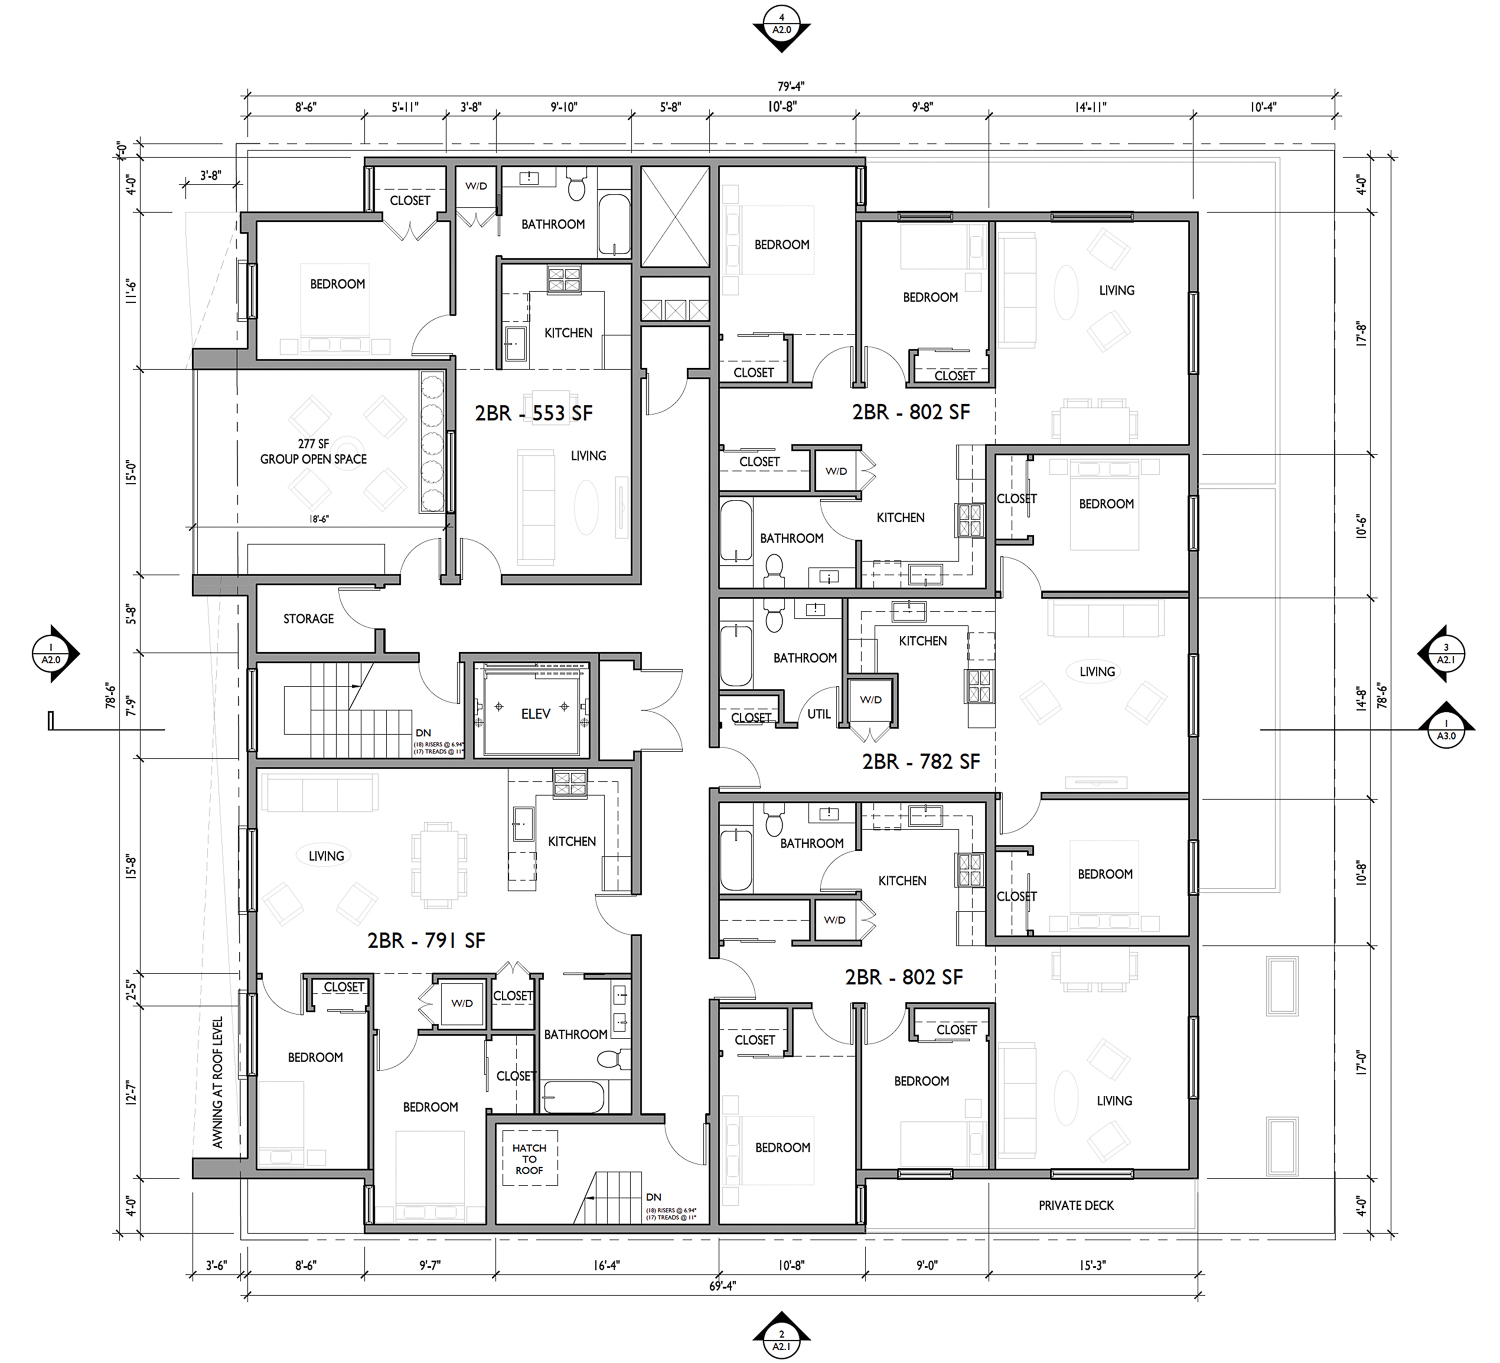 5622 Martin Luther King Jr fifth floor plan, elevation by Gunkel Architecture